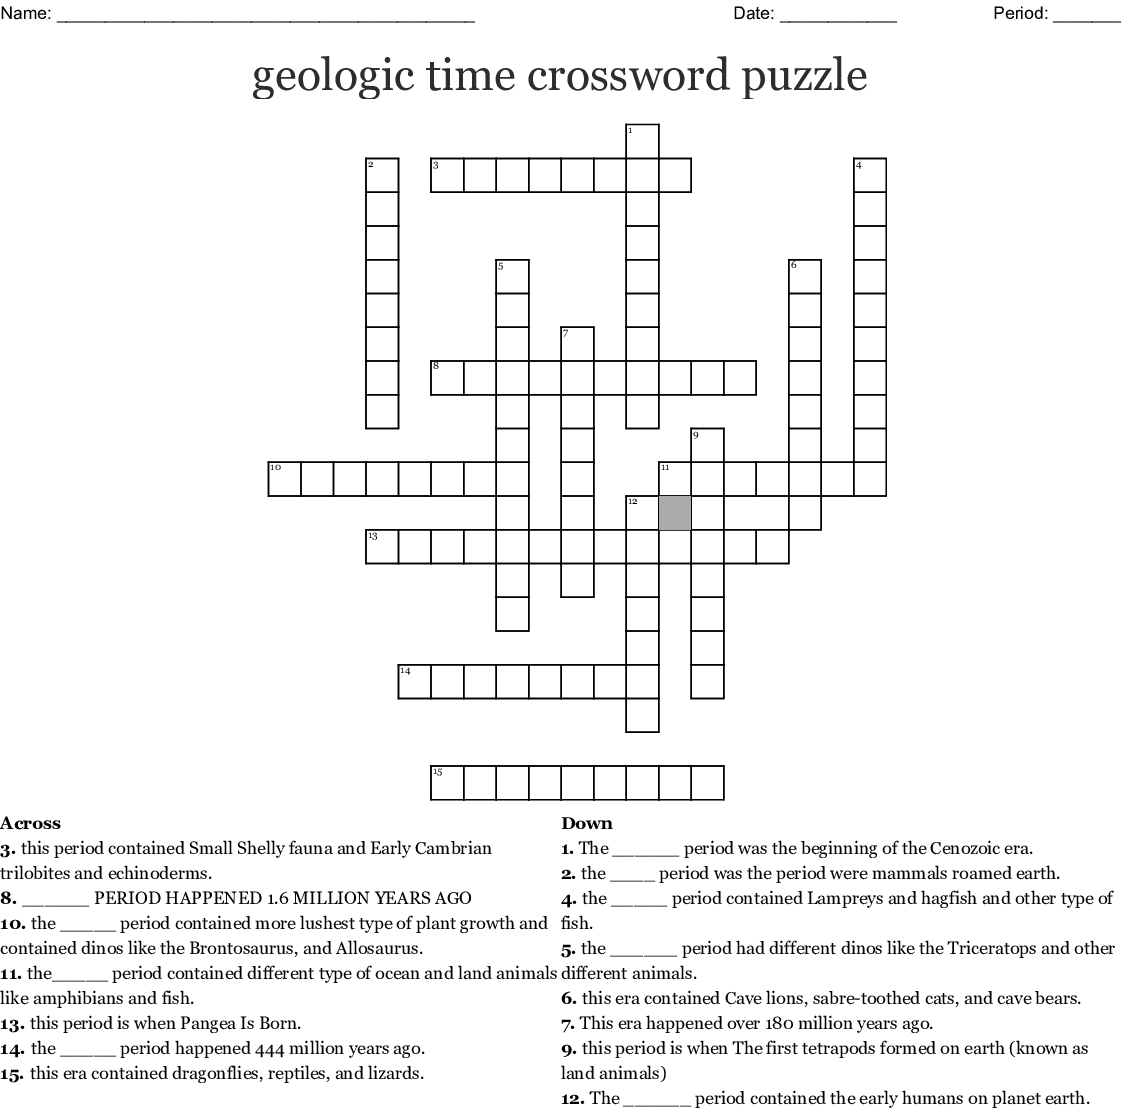 Geologic Time Crossword Puzzle  Word